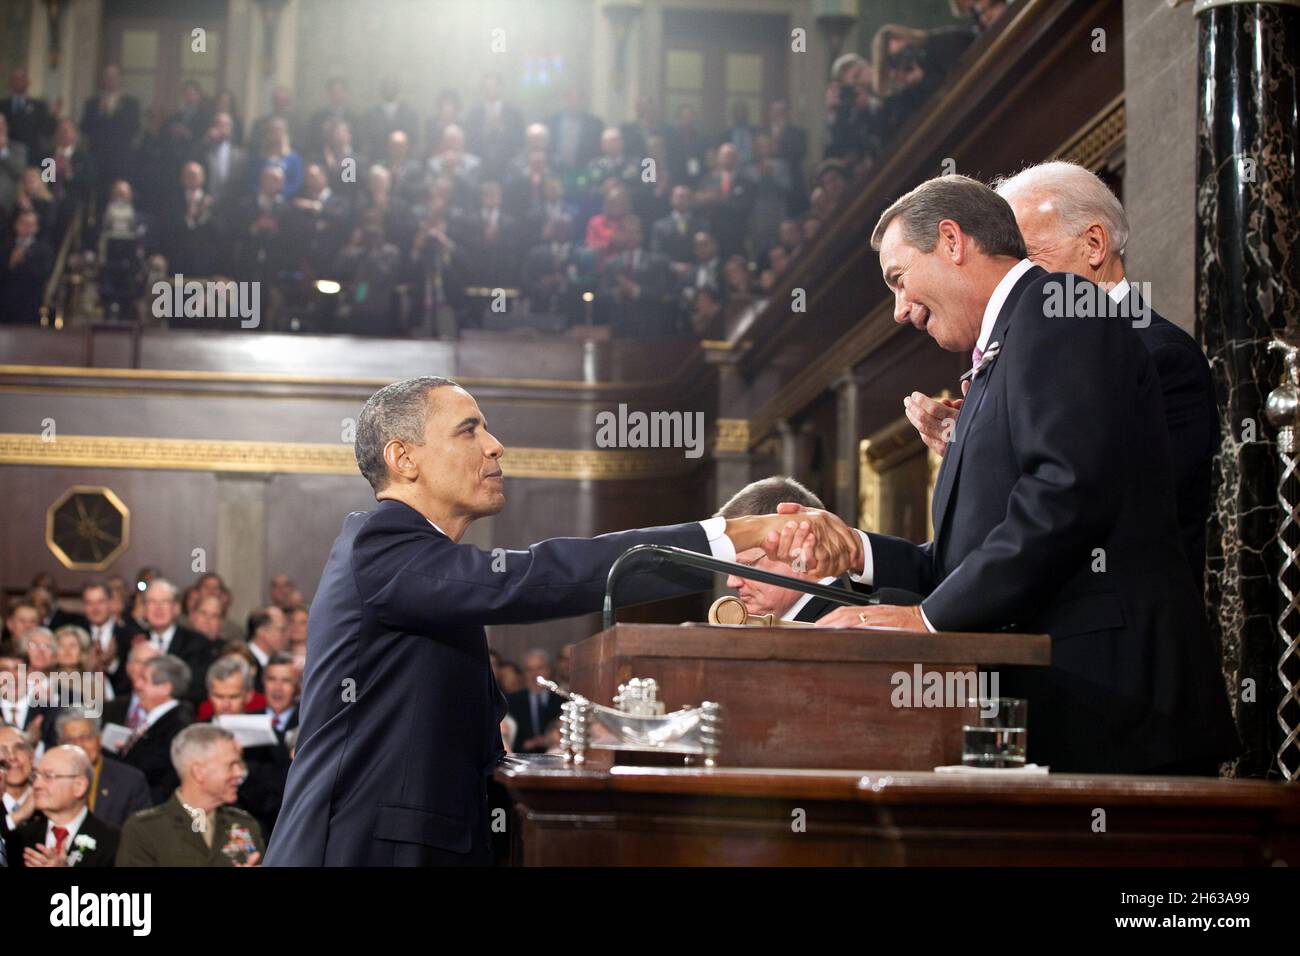 President Barack Obama shakes hands with Speaker of the House John Boehner before delivering the State of the Union address at the U.S. Capitol in Washington, D.C., Jan. 25, 2011. Stock Photo